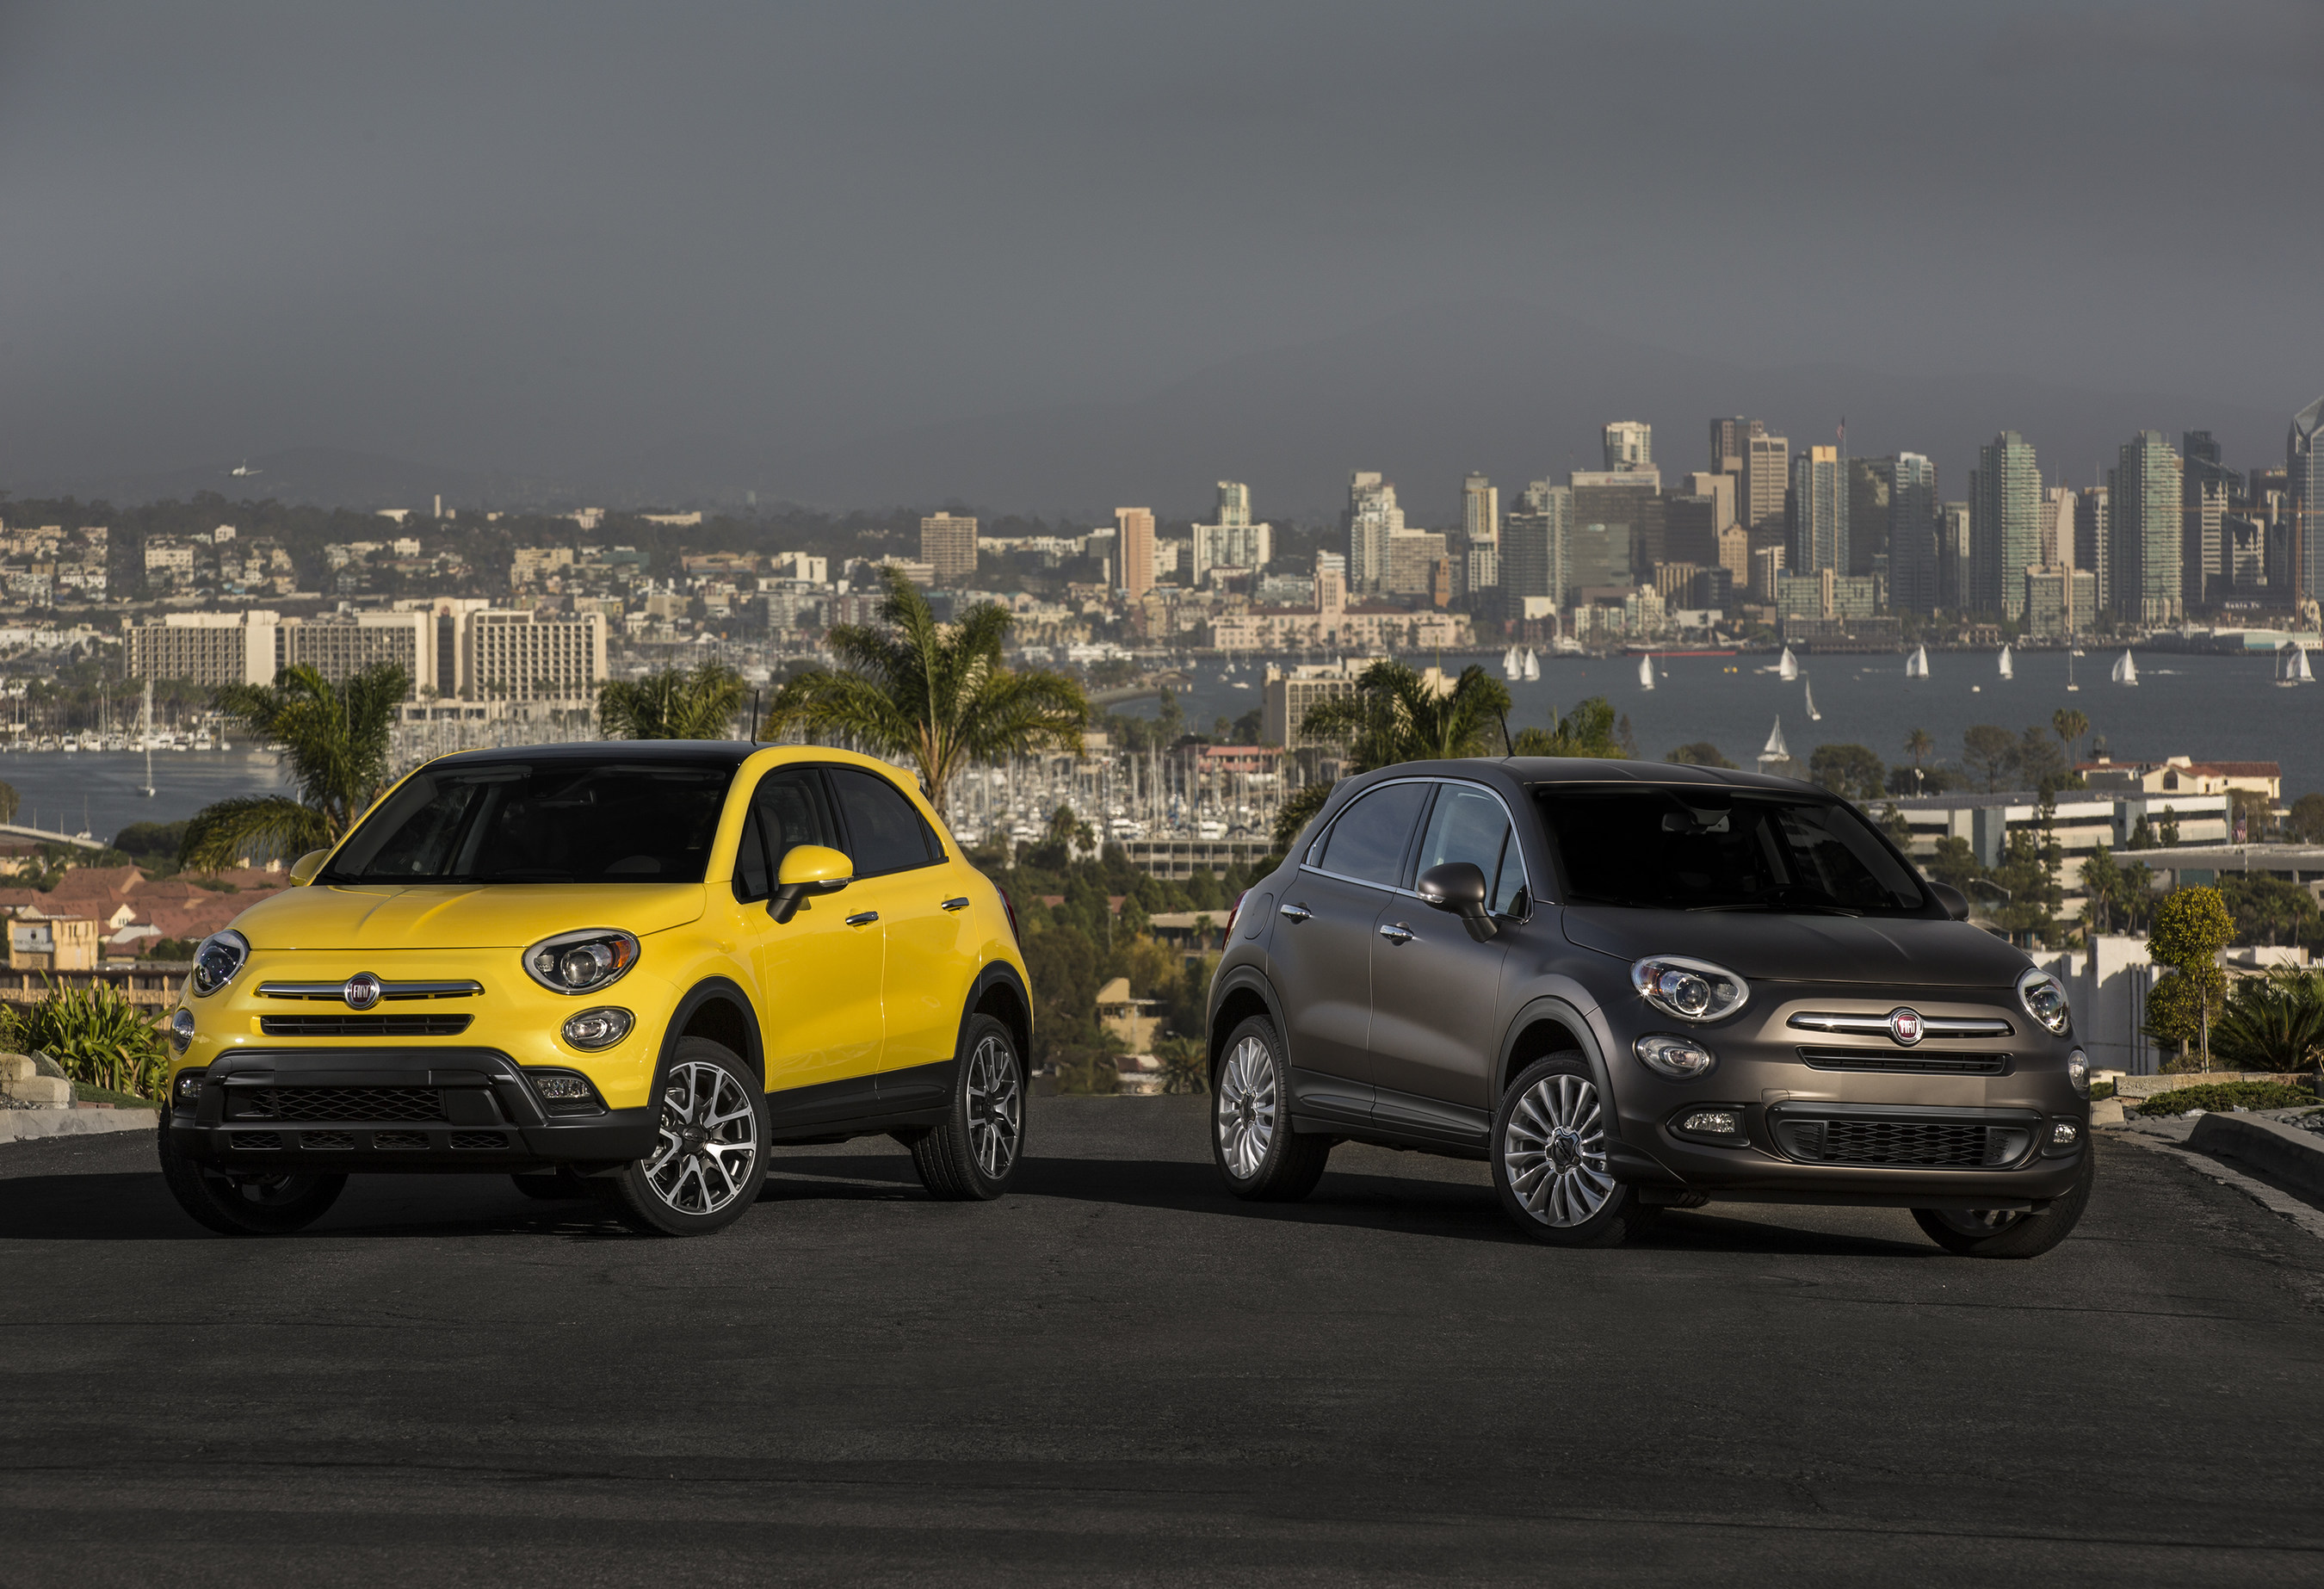 All-new 2016 Fiat 500X combines iconic Italian style with functionality, performance and all-wheel-drive confidence.